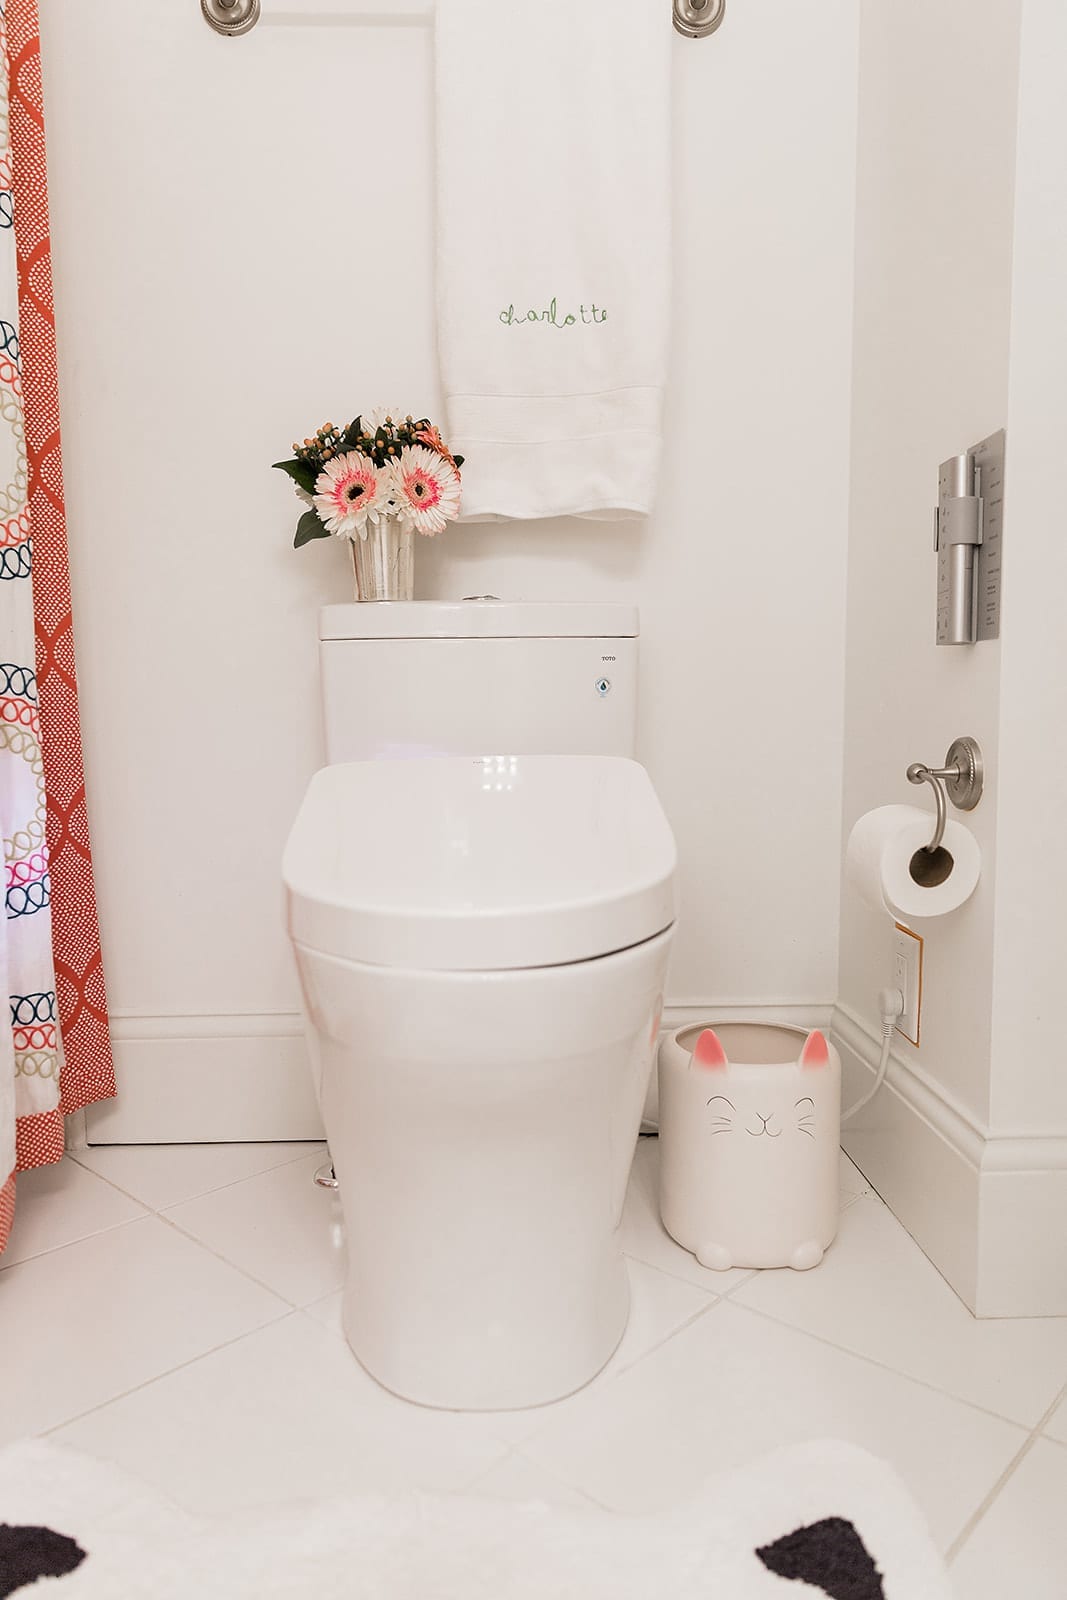 Be “TOTO-ly” clean! We put in a TOTO Aquia IV WASHLET+ S550e in both our powder bathroom, and our daughter’s bathroom. Why? Because life w/ 3 busy kids make these bathroom areas, ahem, well-loved! Kids can rush through hand washing. This WASHLET+ model provides auto-open/close lid and auto-flush! No hands touching anything! Plus, I feel better knowing my little people get properly clean thanks to the bidet “services” of WASHLET 😉 Head to my website for all the details so you can get “TOTO-ly” clean, too!